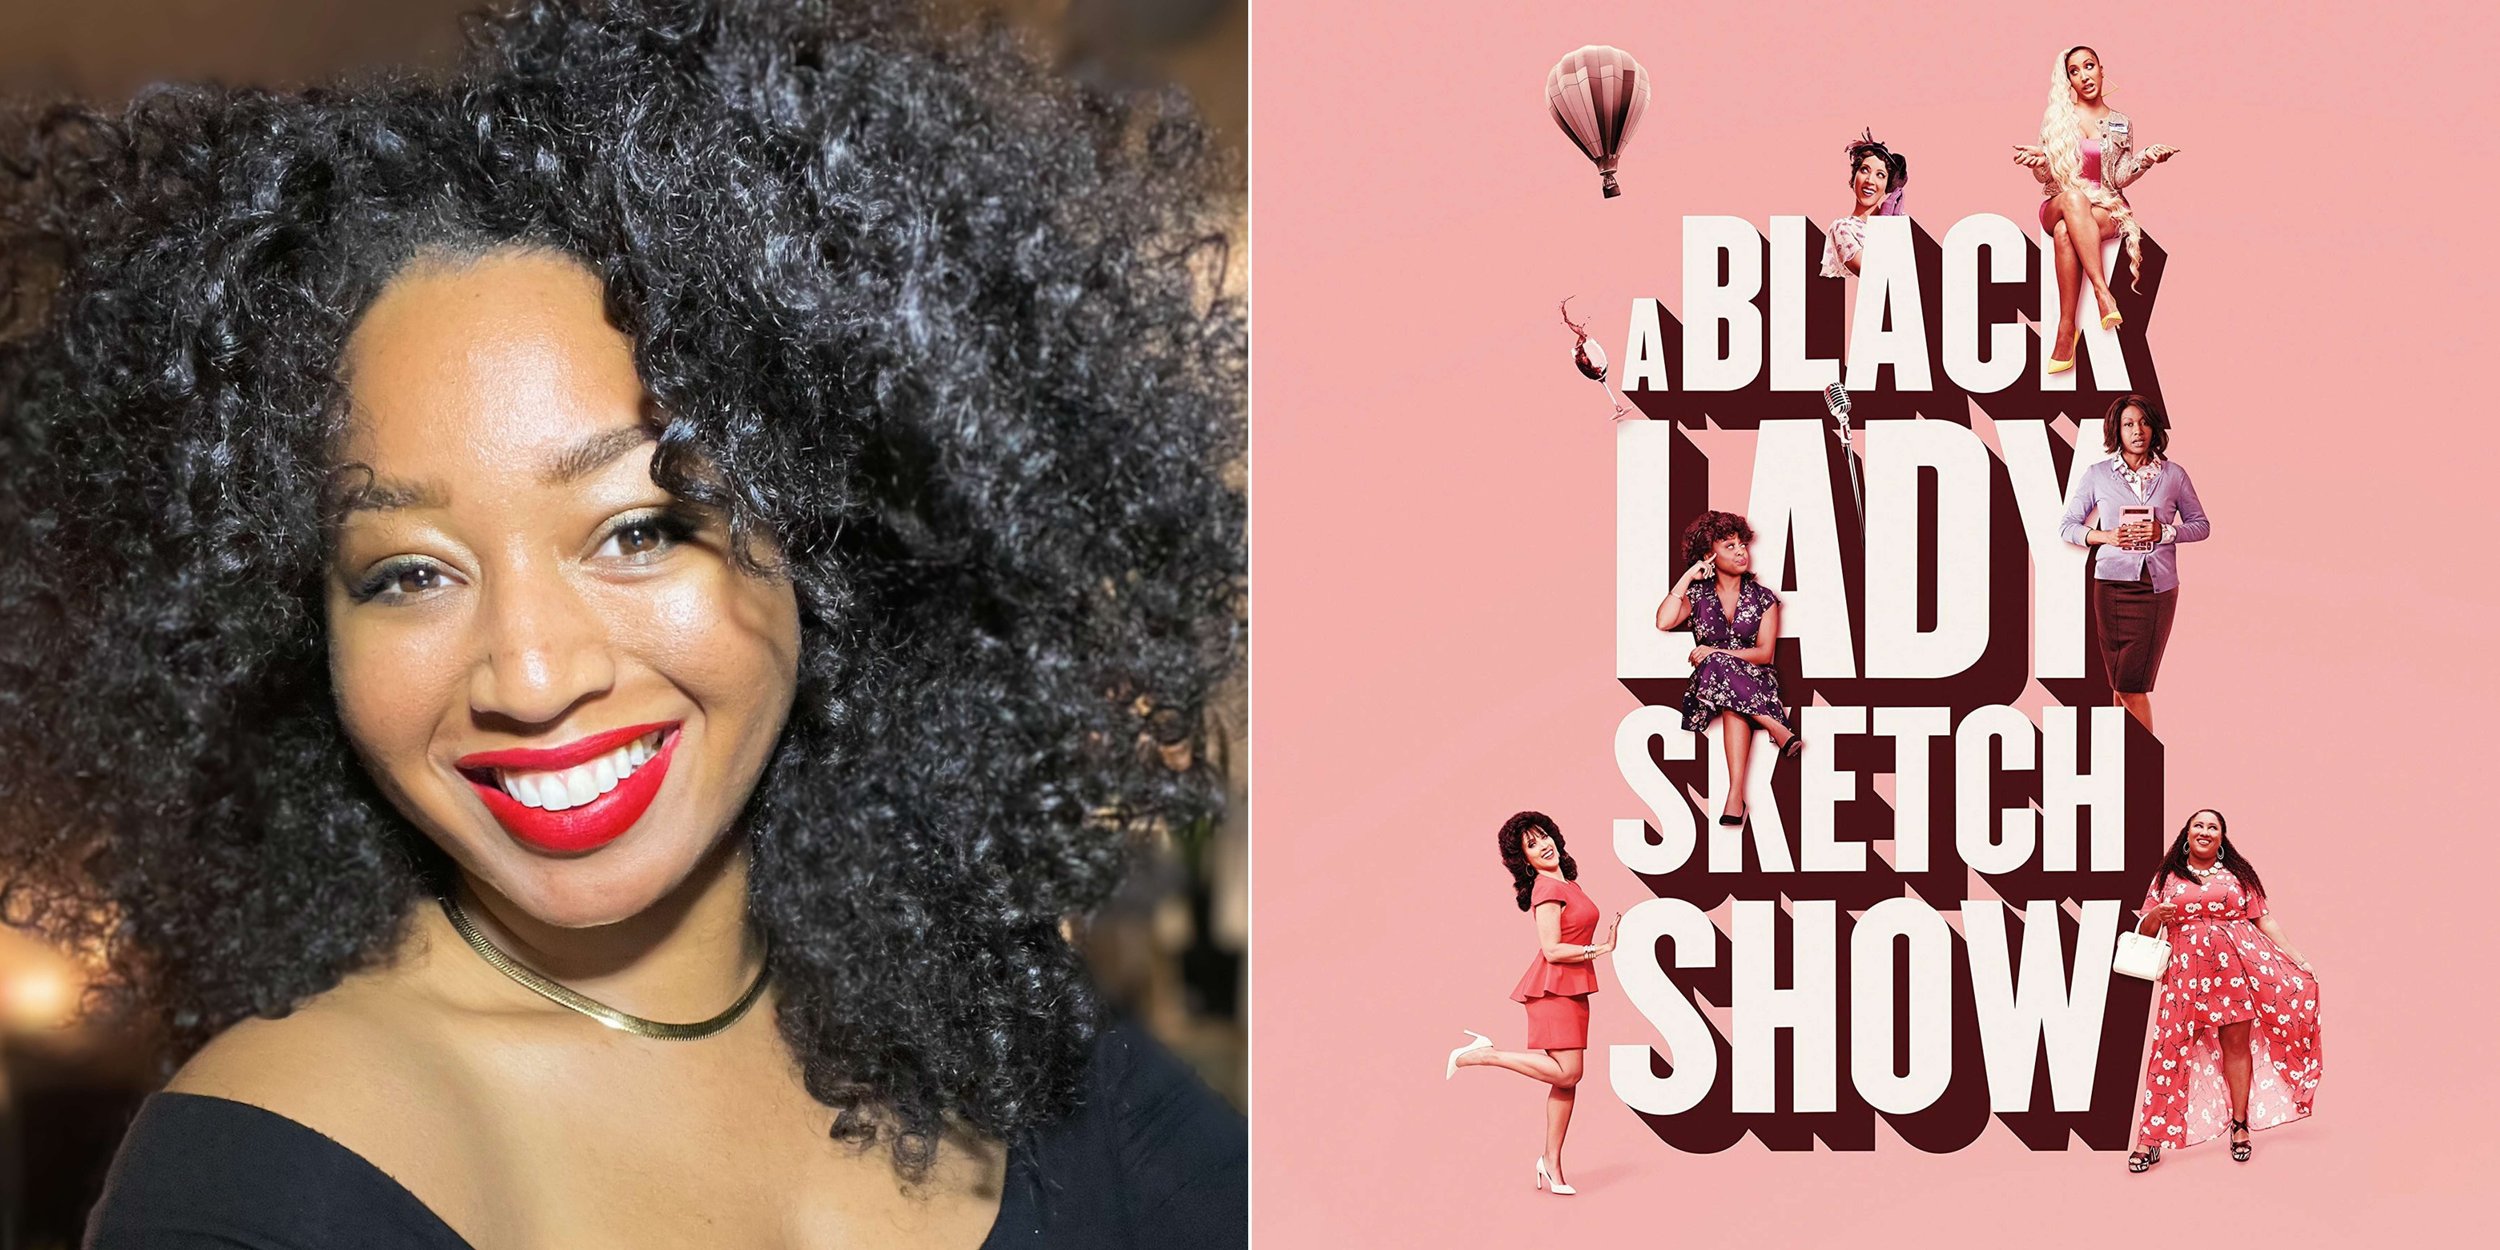  Ashlea Archer was hired as a Script Coordinator on  A Black Lady Sketch Show . 